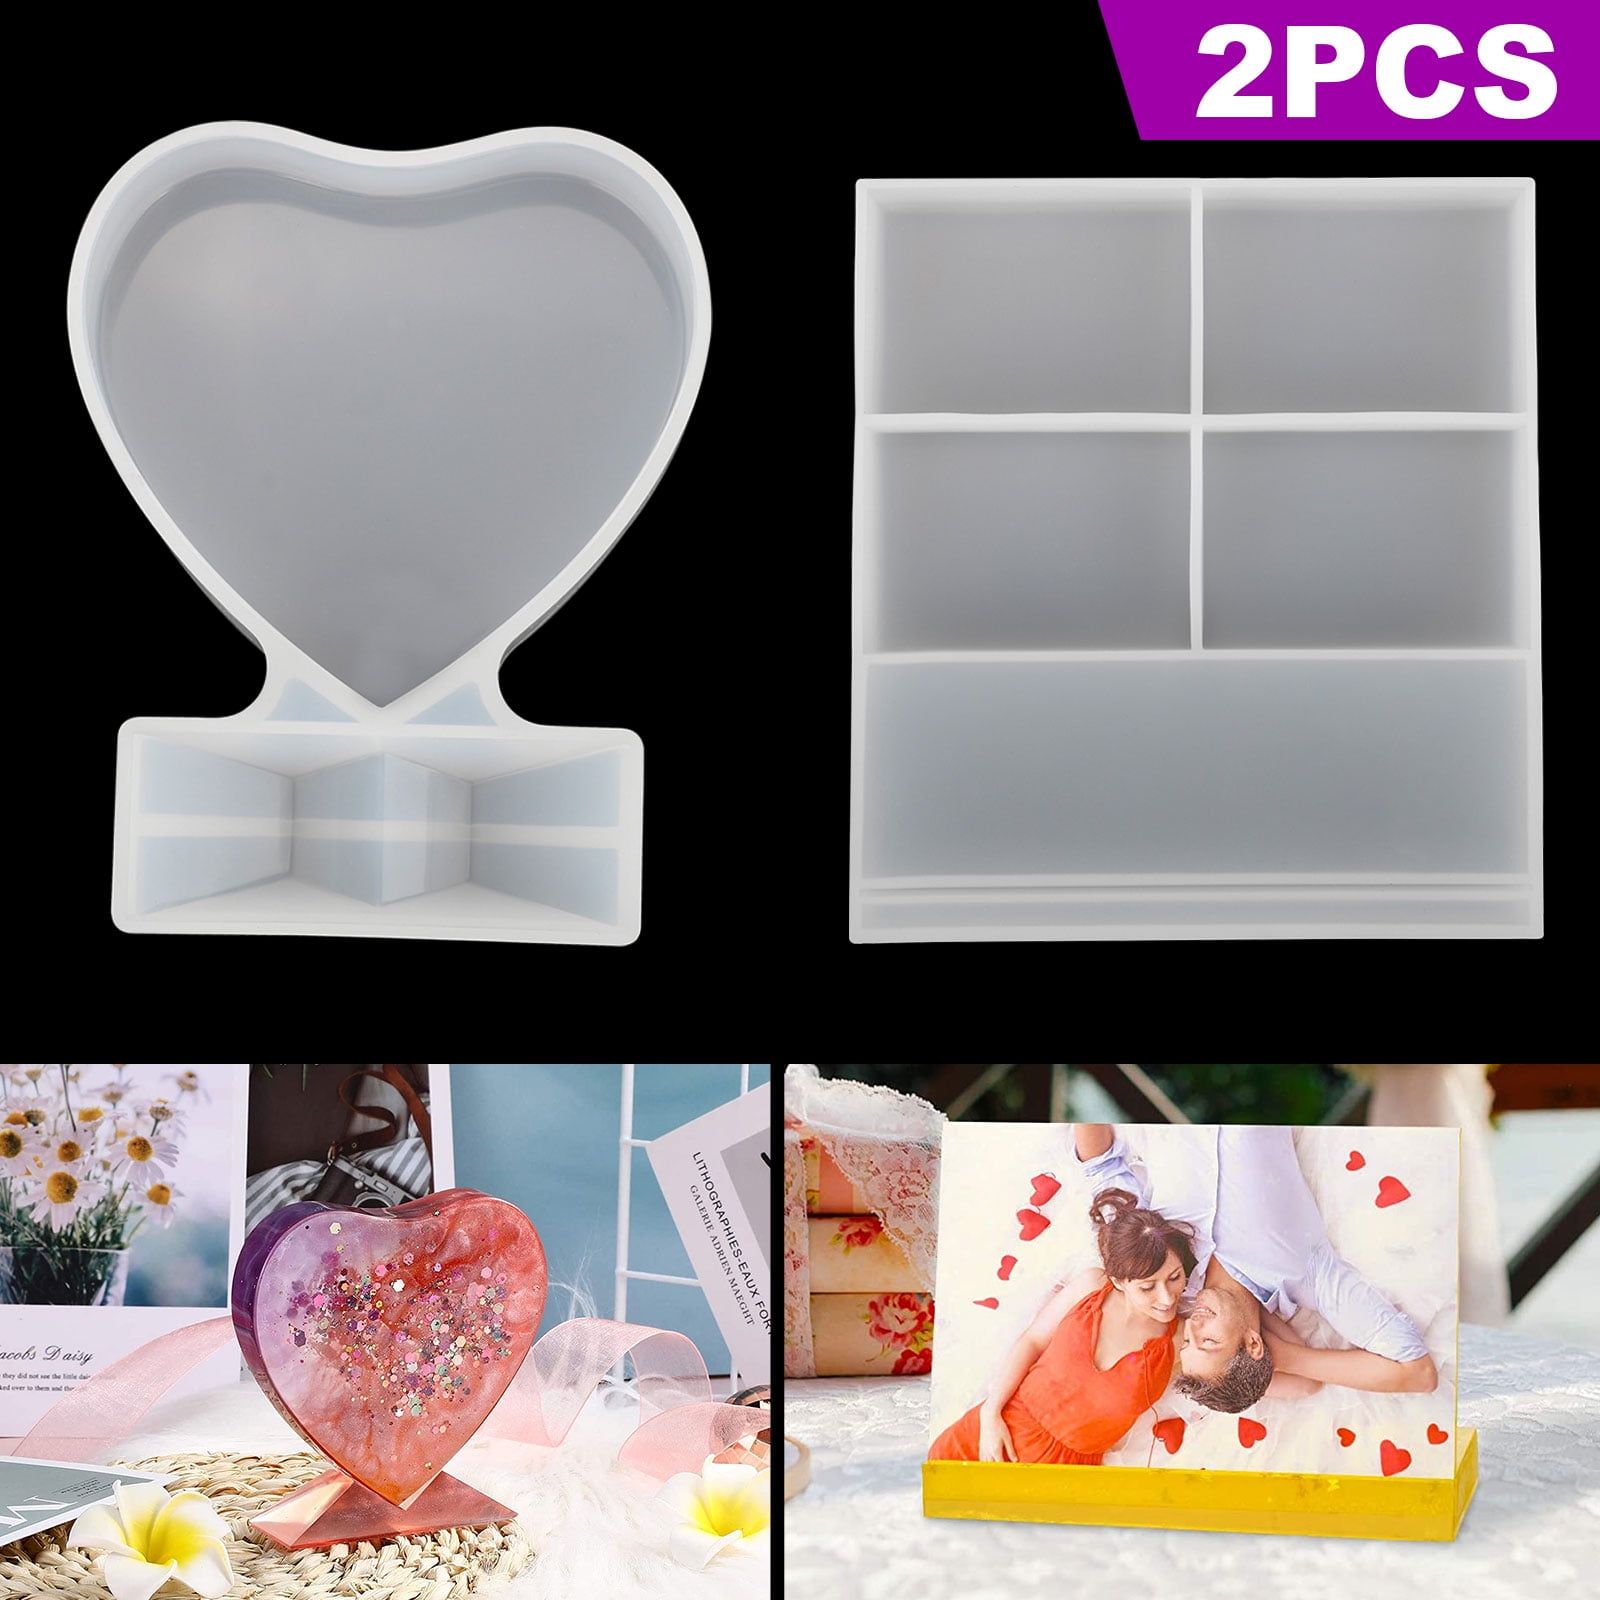  Resin Photo Frame Molds - Resin Heart Mold,Silicone Molds  Picture Frame,Epoxy Molds for Casting,Resin Molds,Craft Project,Photos  Display Tool,Art Supplies,Home Decor,Gift : Arts, Crafts & Sewing